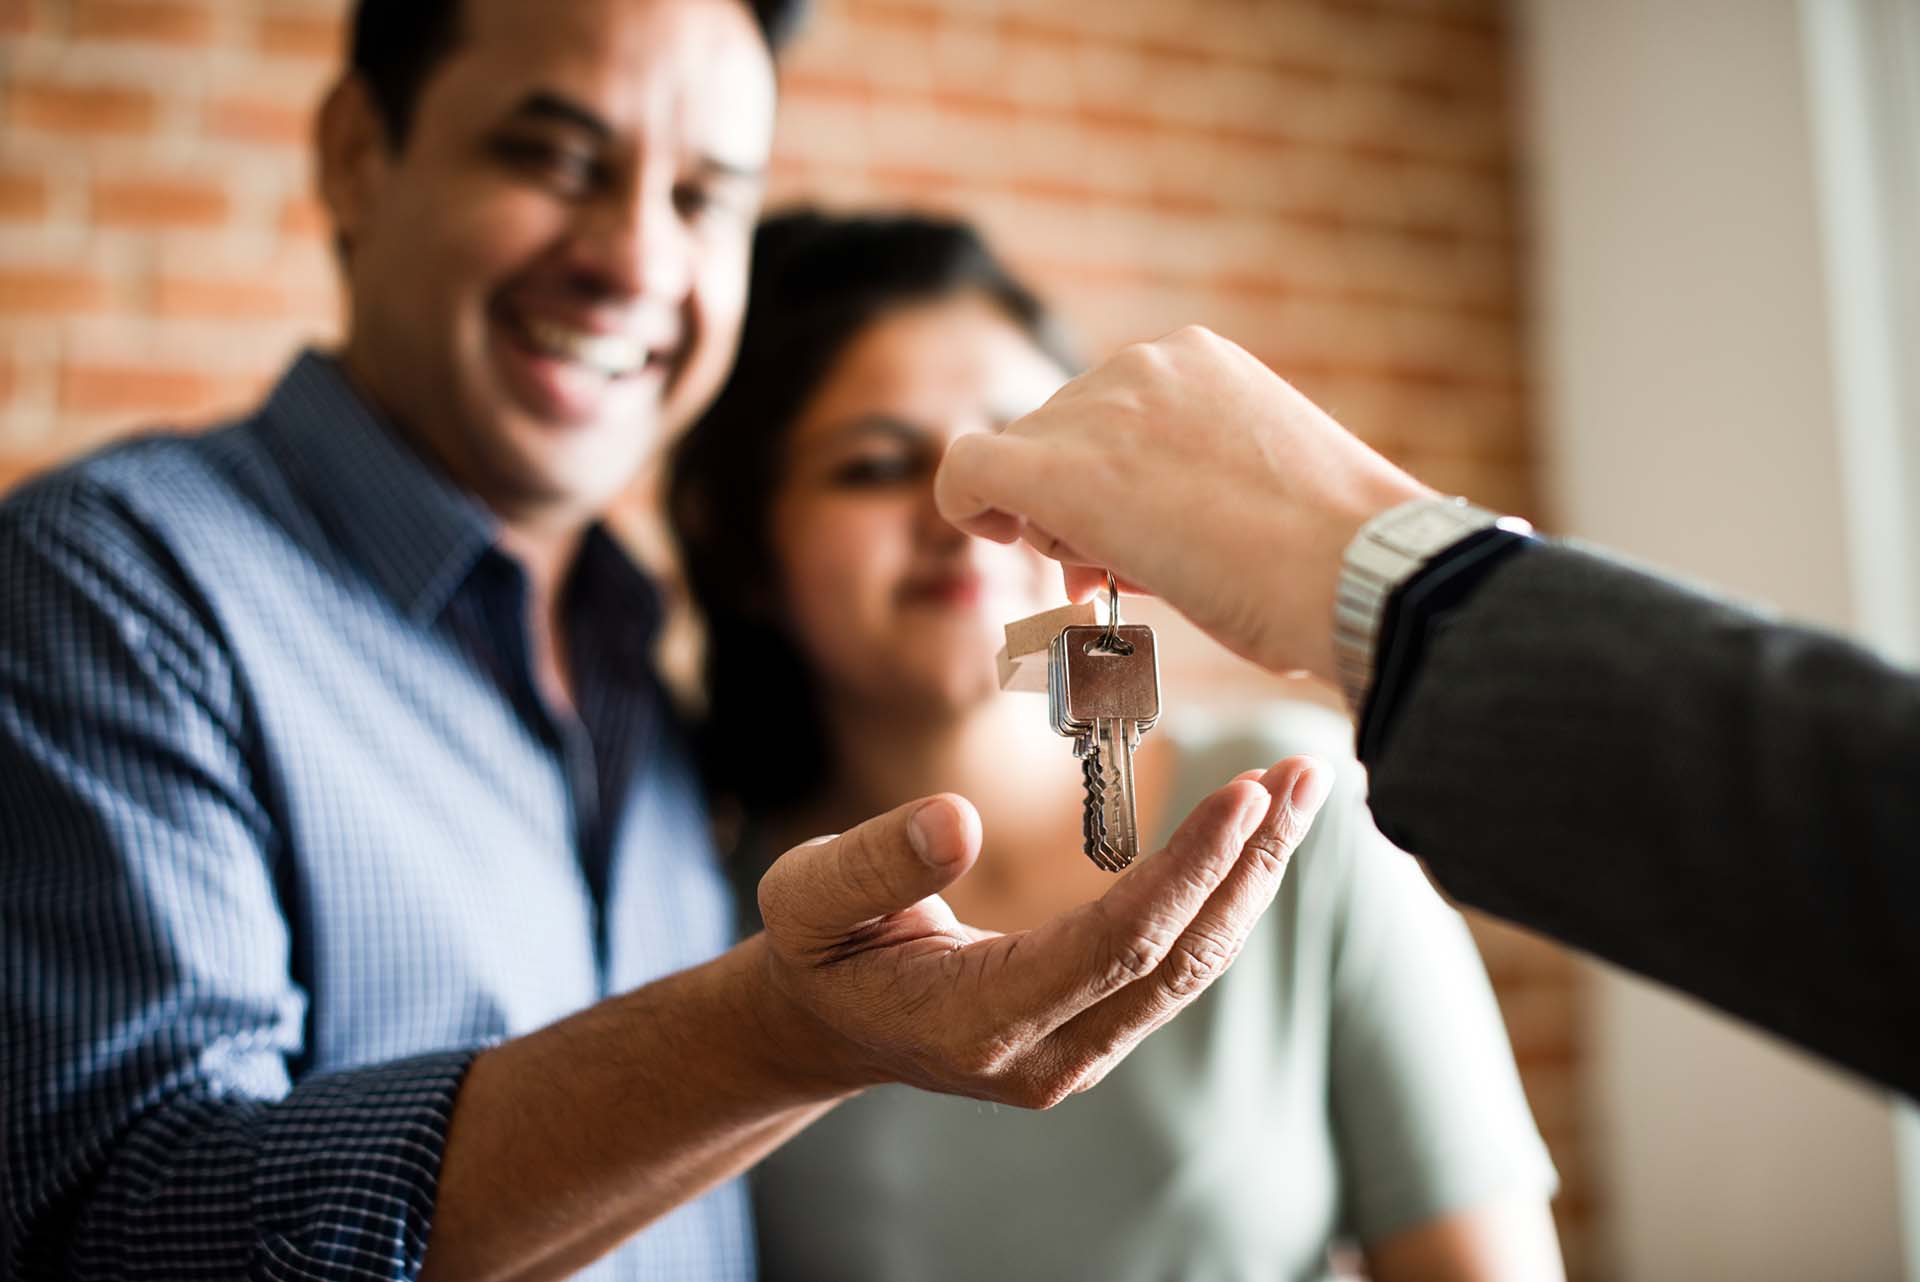 Local real estate agents and realtors are ideal when selling your house or in the home buying process.